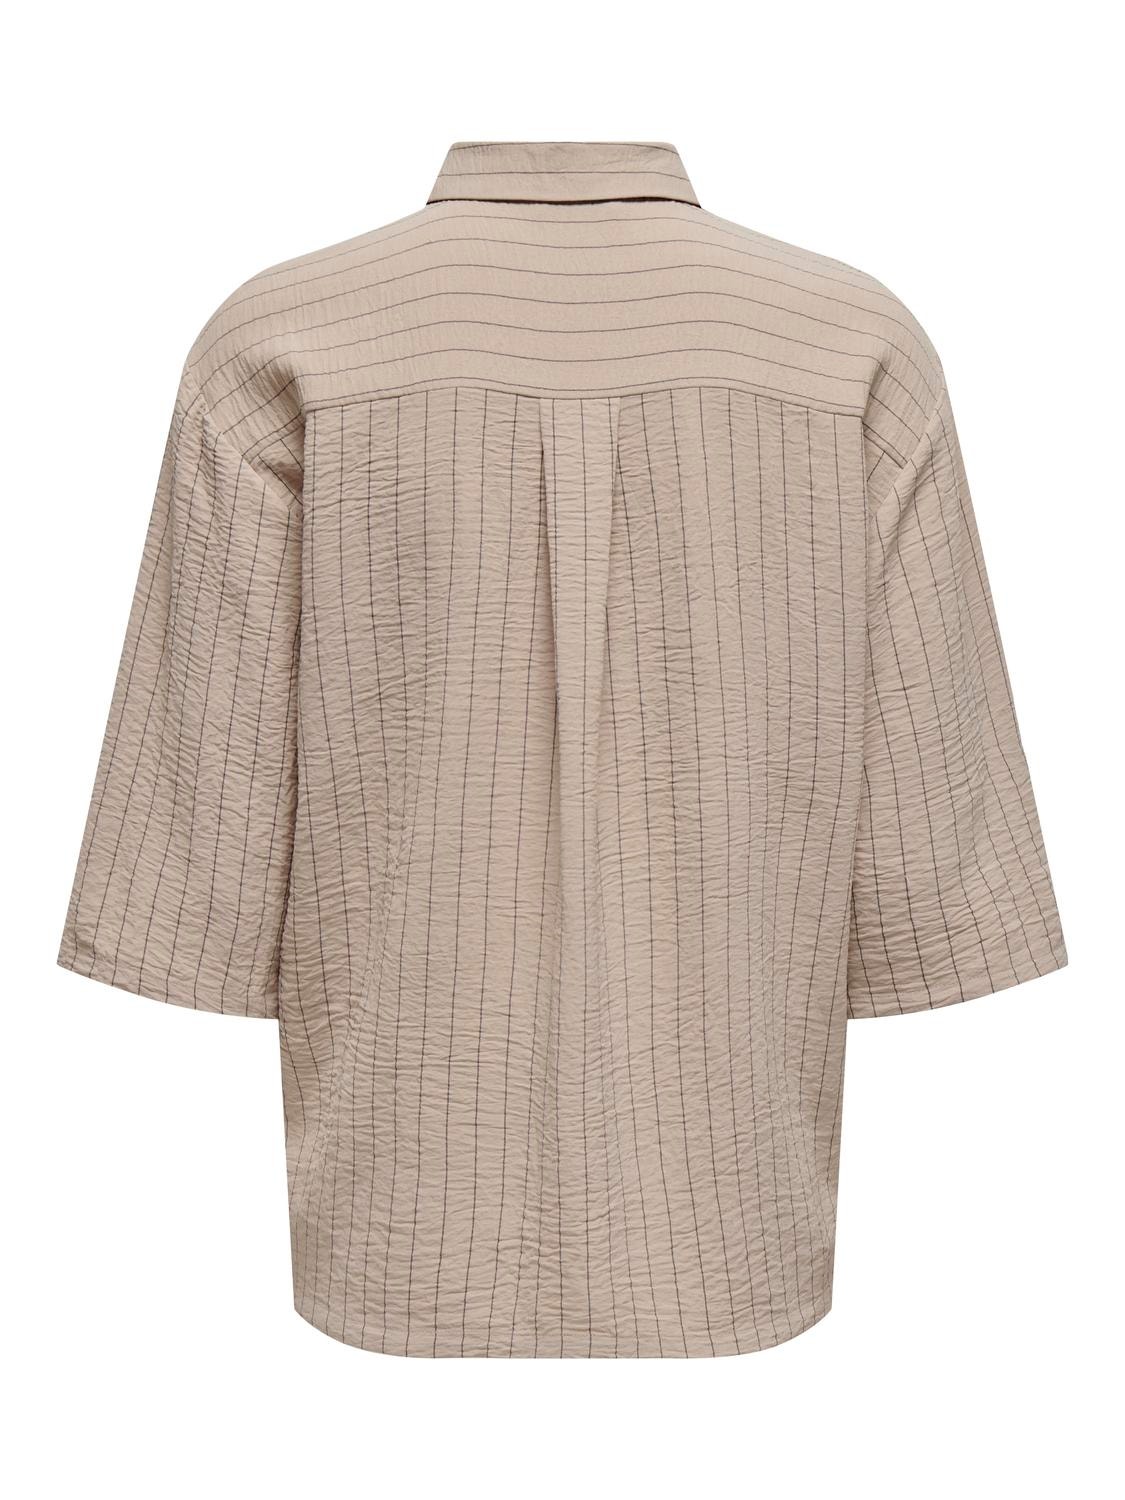 ONLY Striped shirt with oversized fit -Beige - 15317636